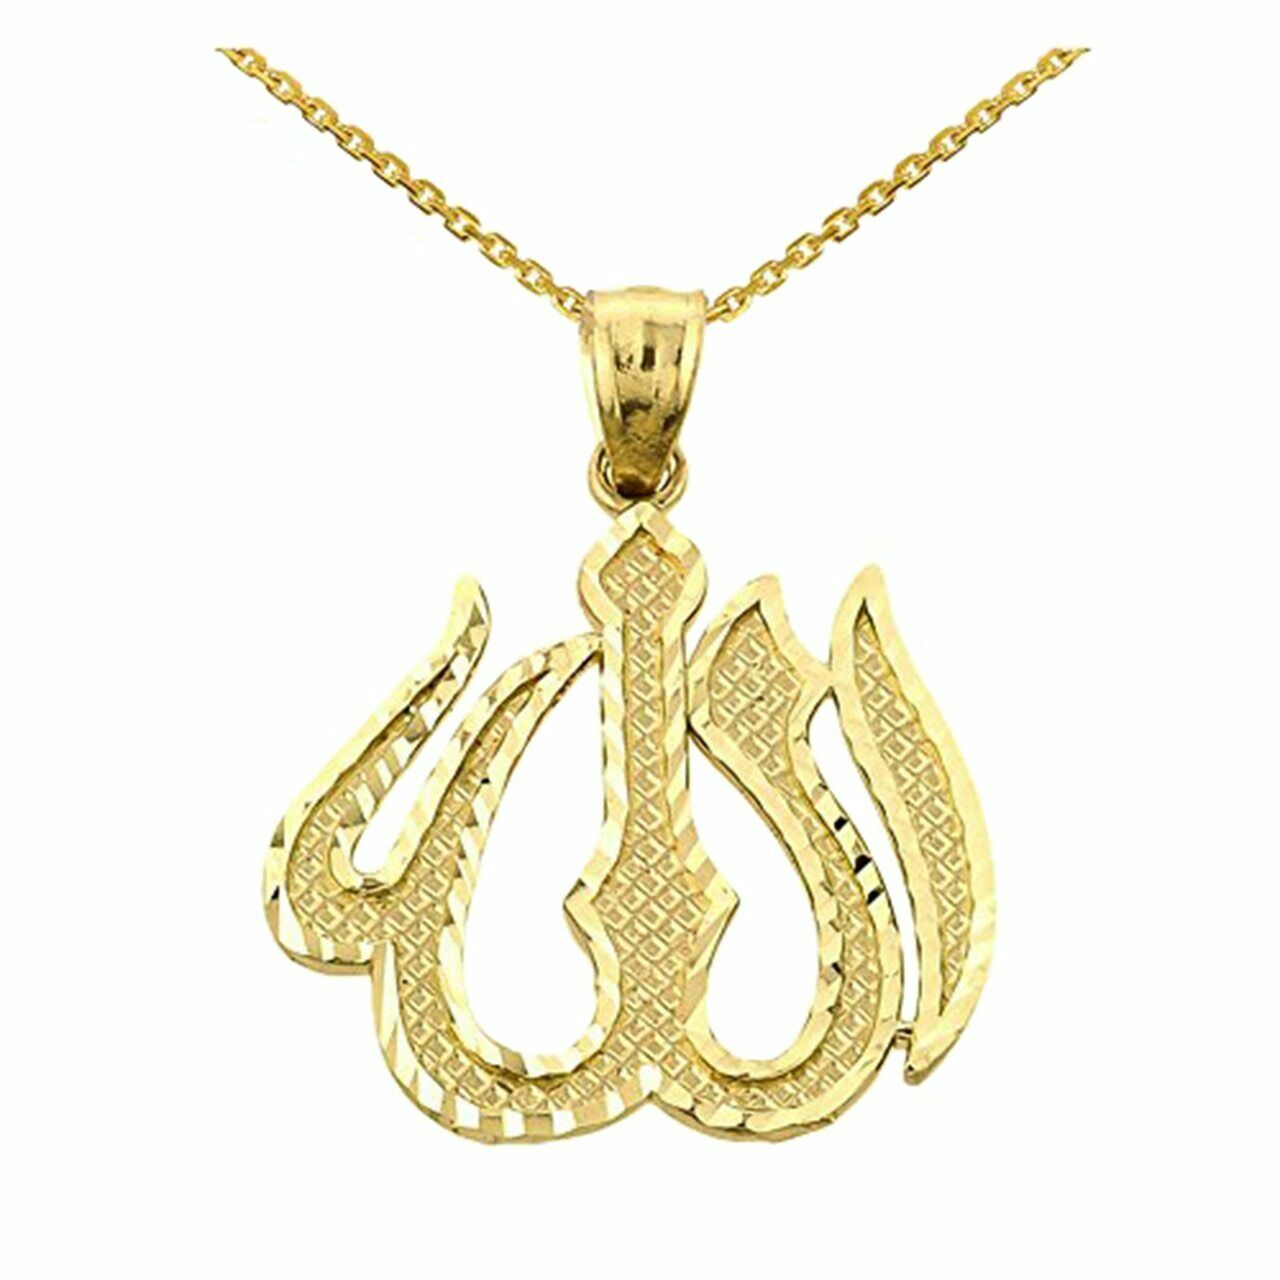 10k Real Solid Yellow Gold Diamond Cut Allah Pendant Necklace